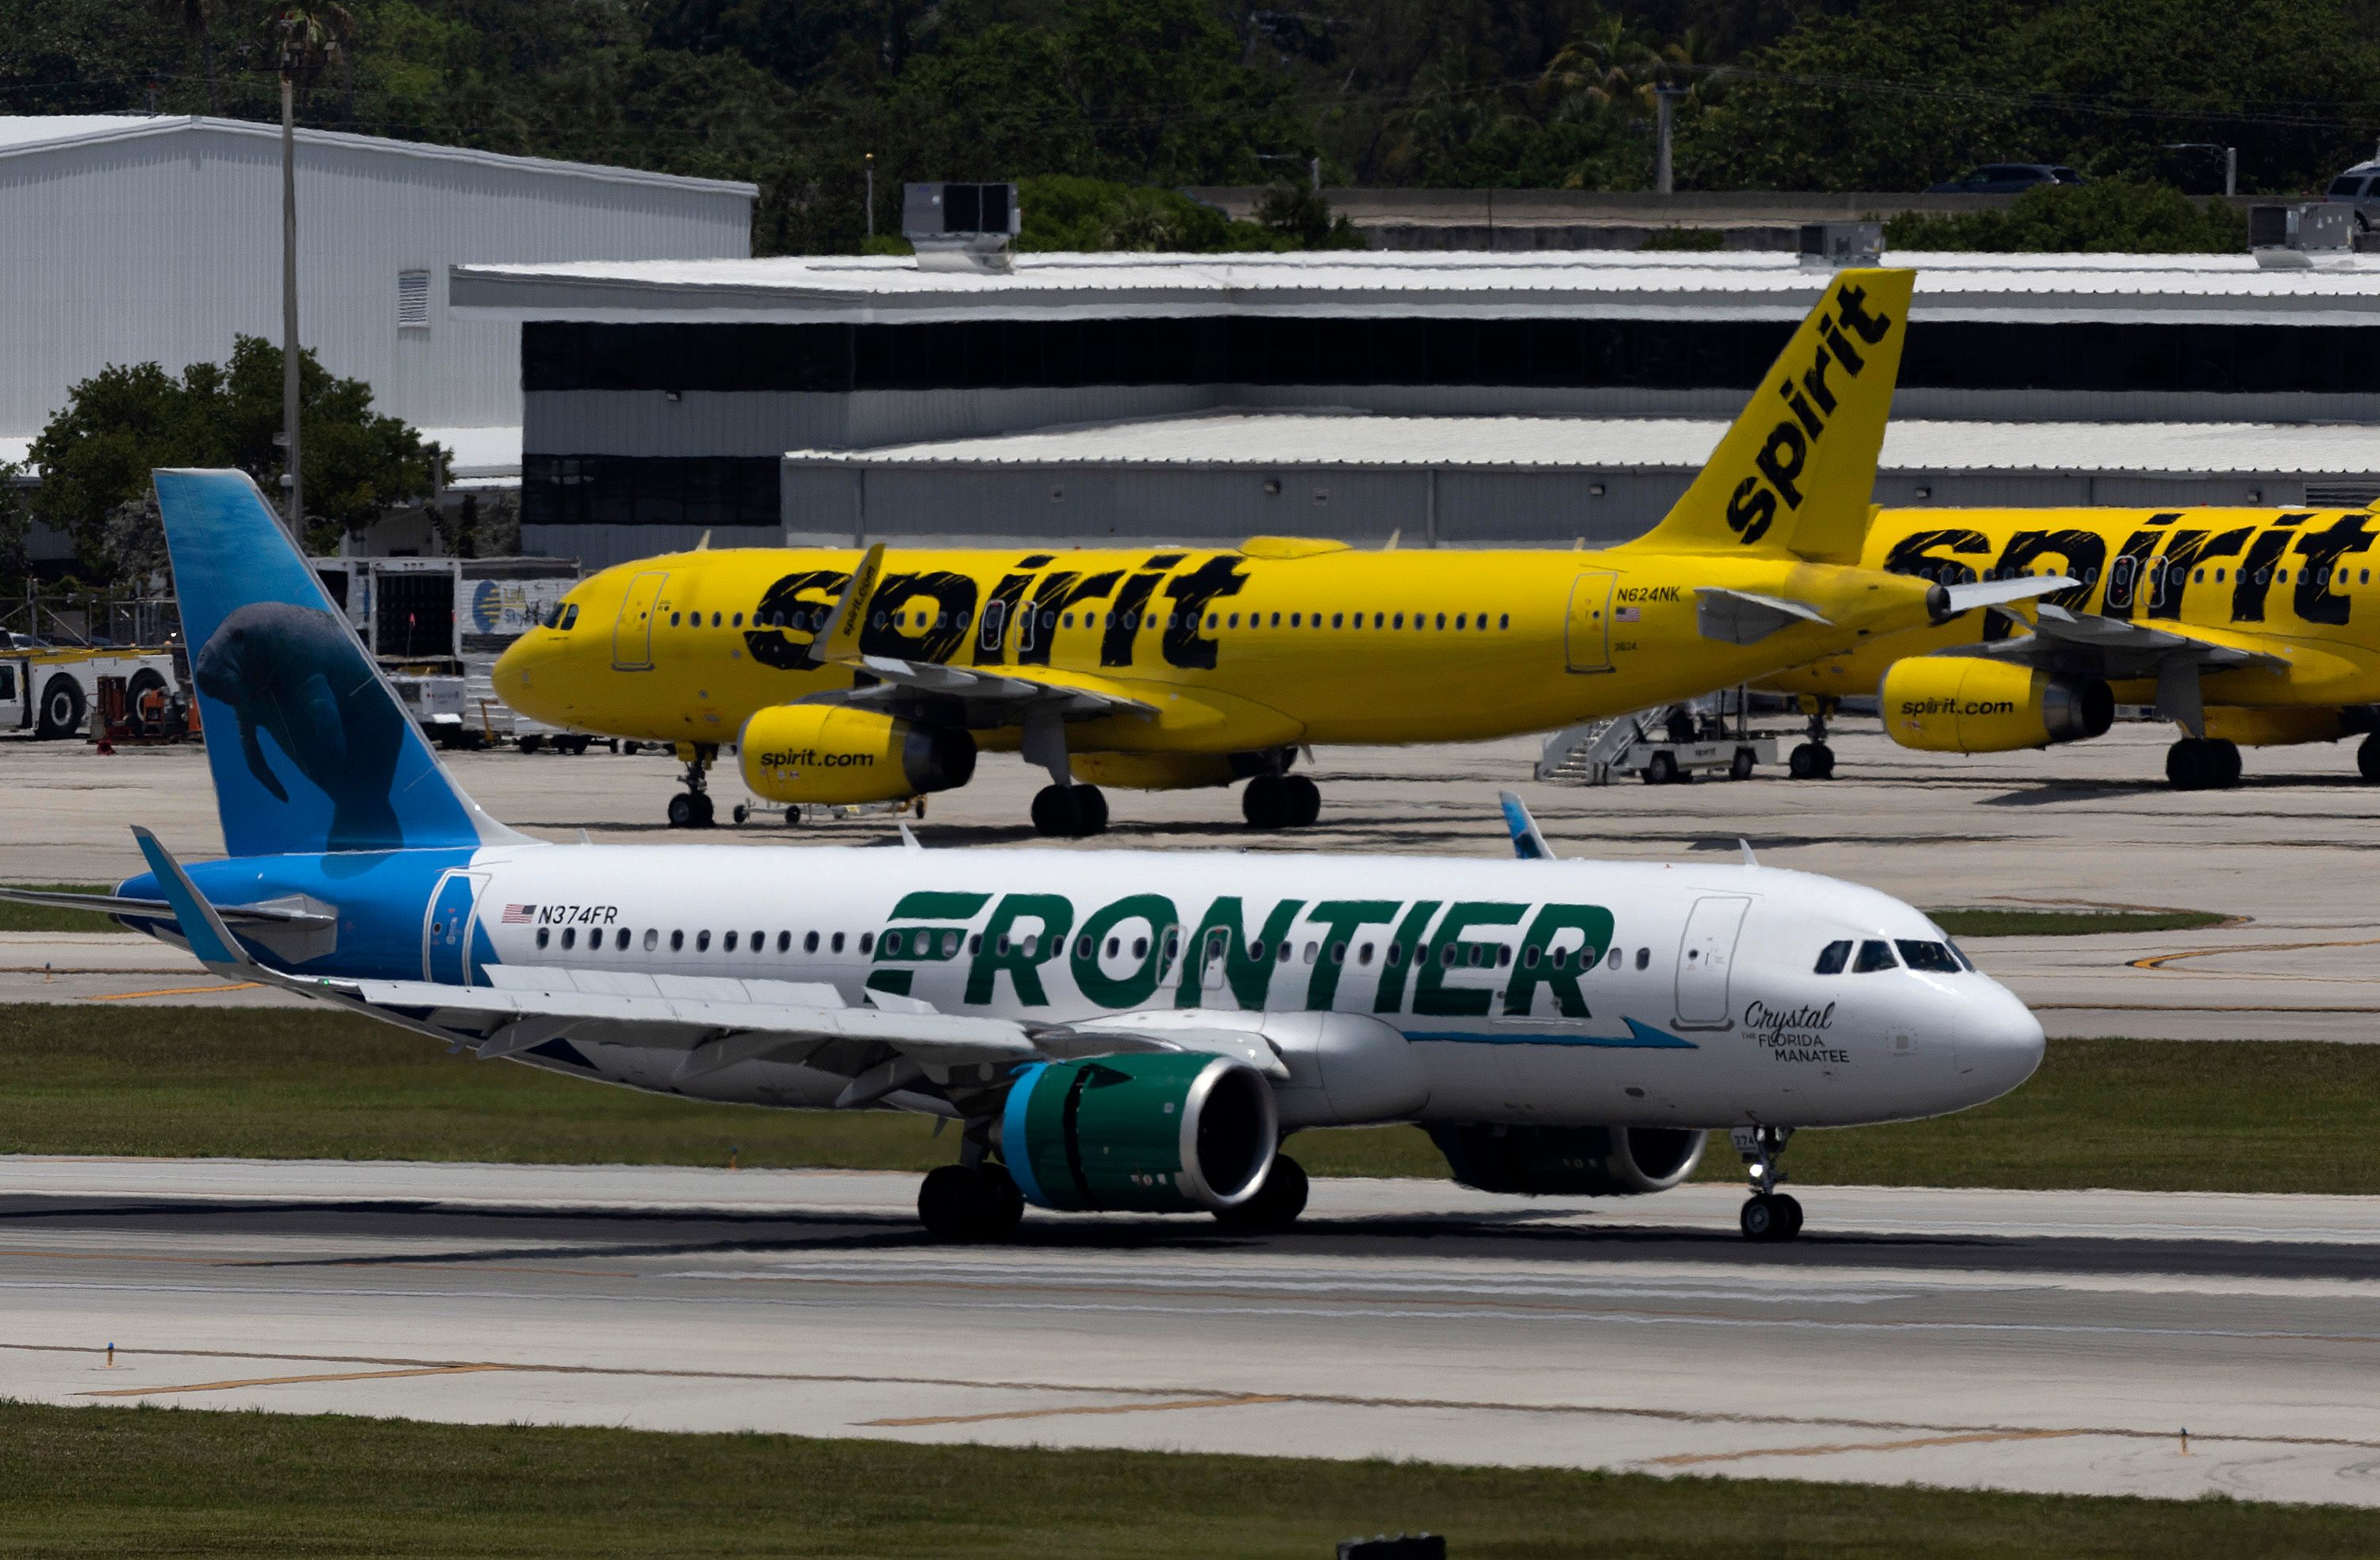 Frontier-Spirit-Airlines-Aircraft-Apron-Getty-1397588232